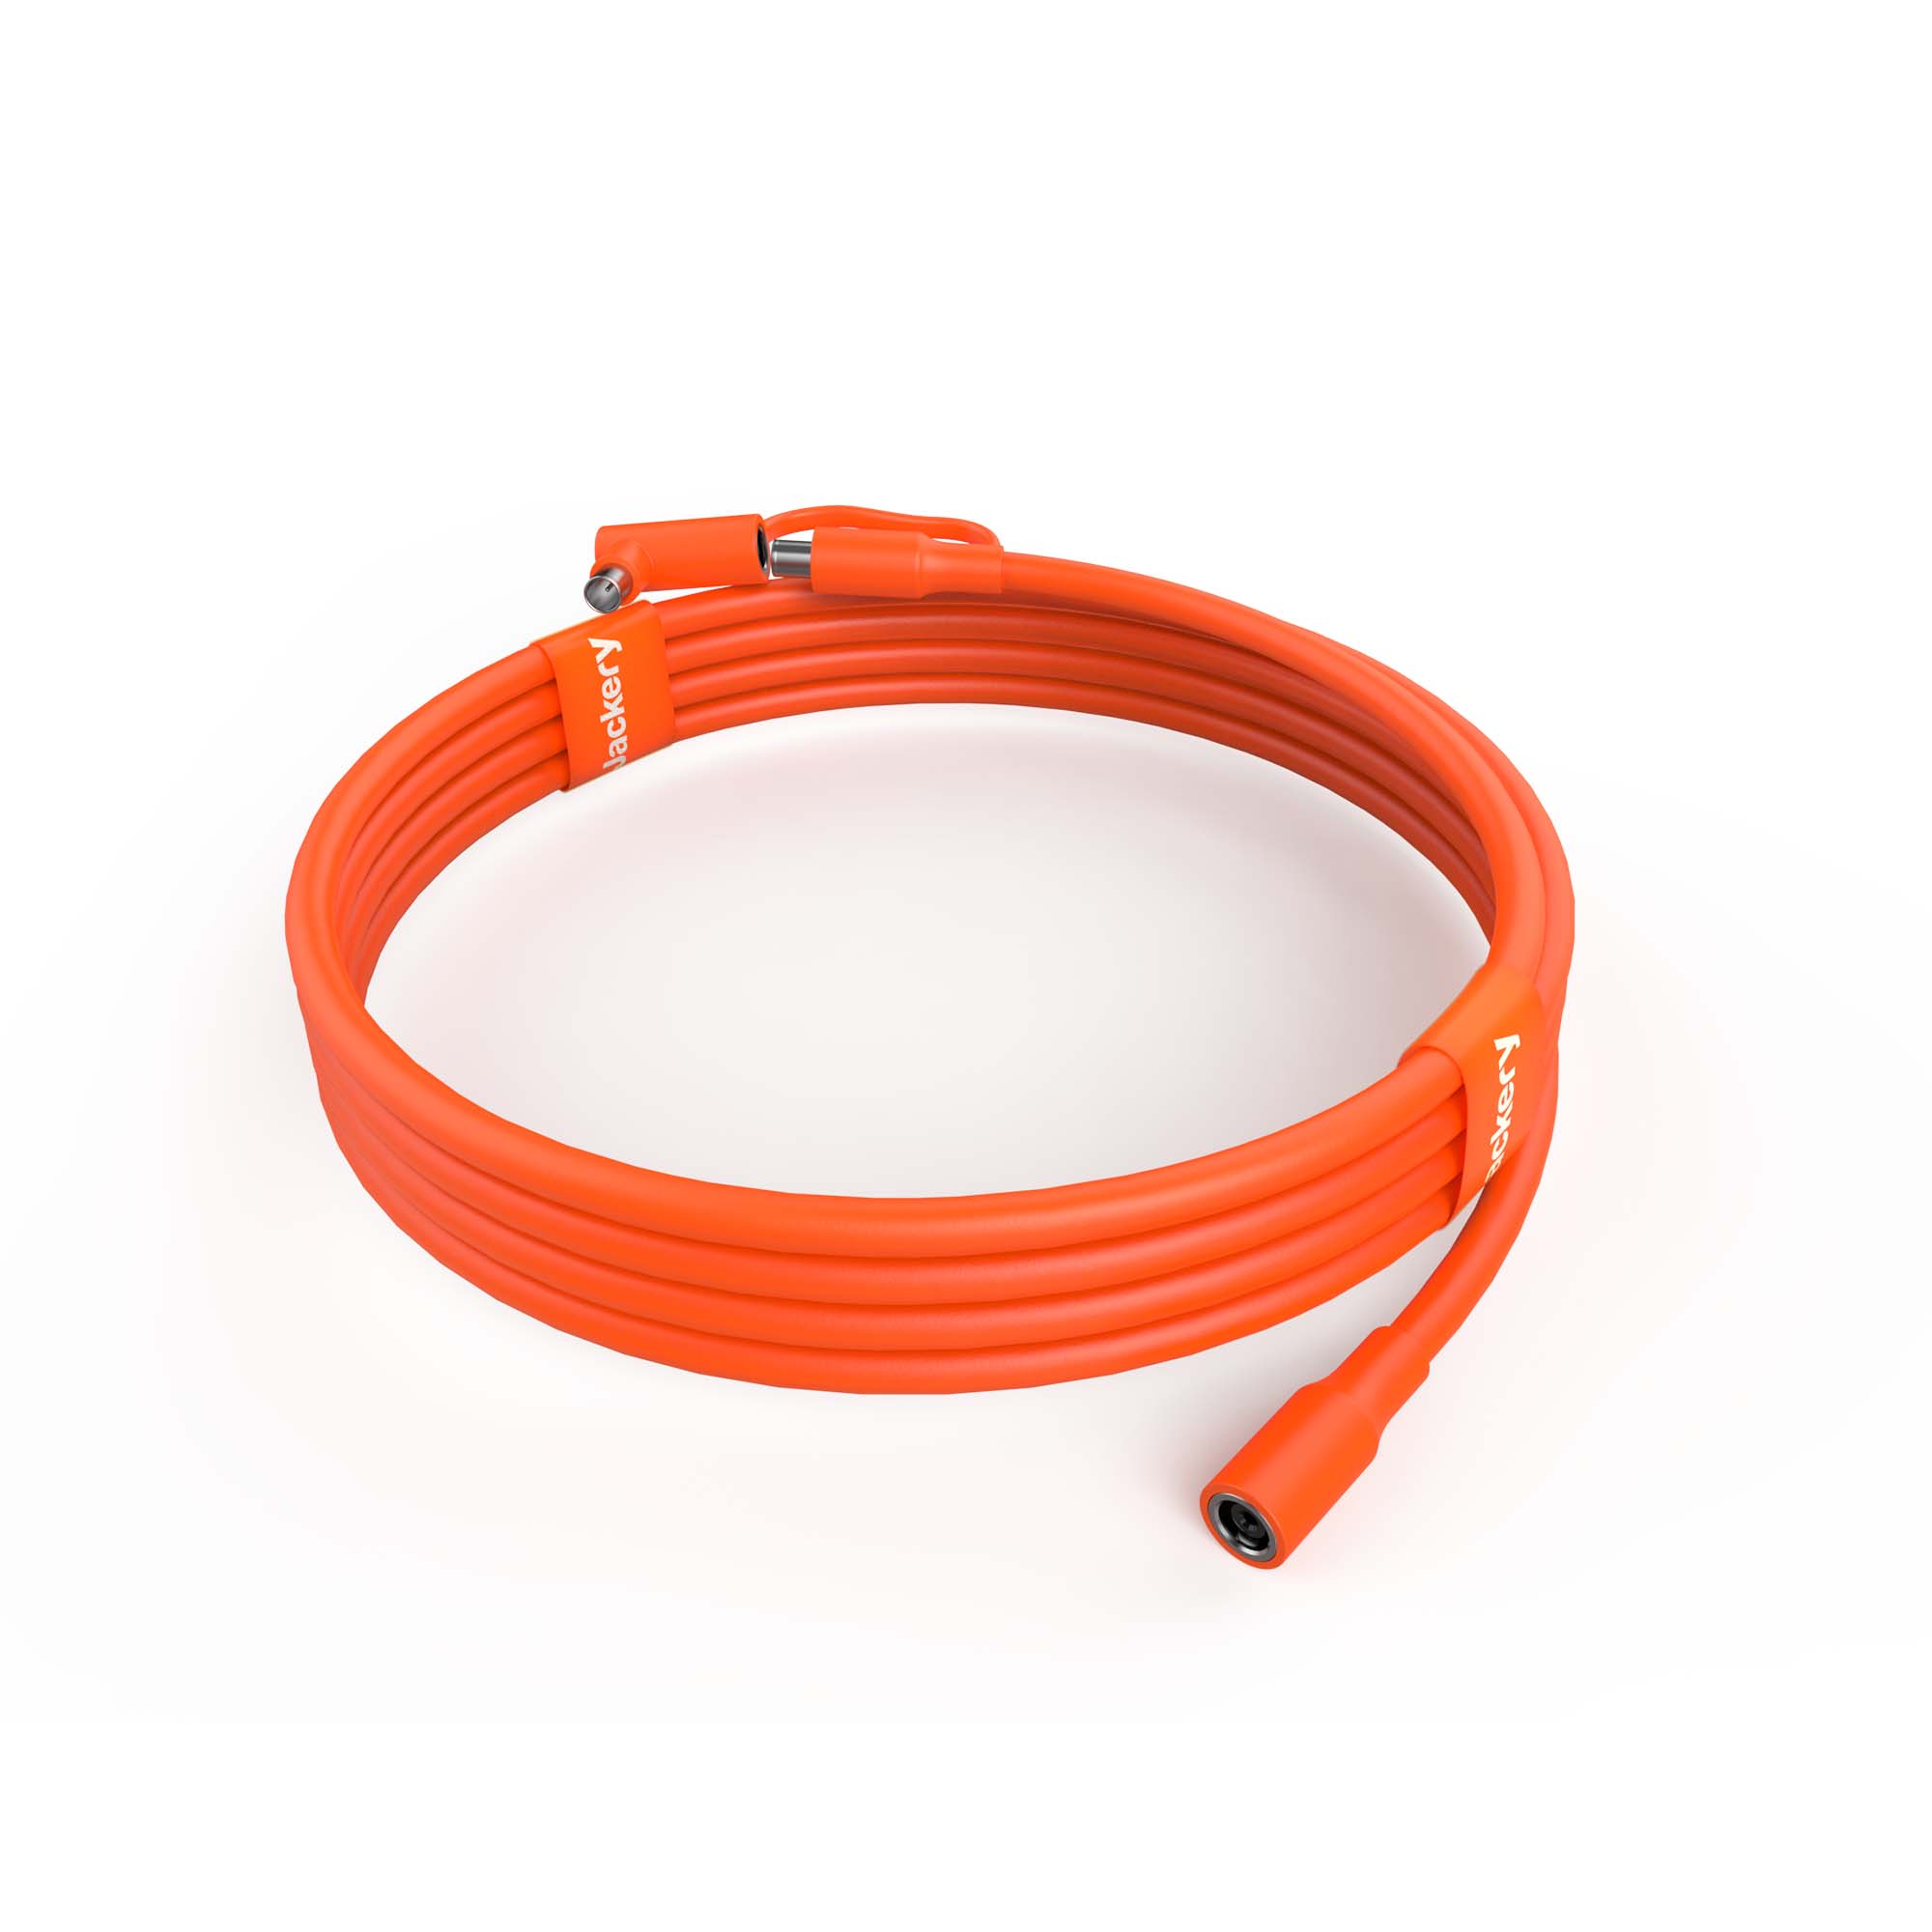 Buy Efficient 500 Ft Extension Cord for High Energy Needs